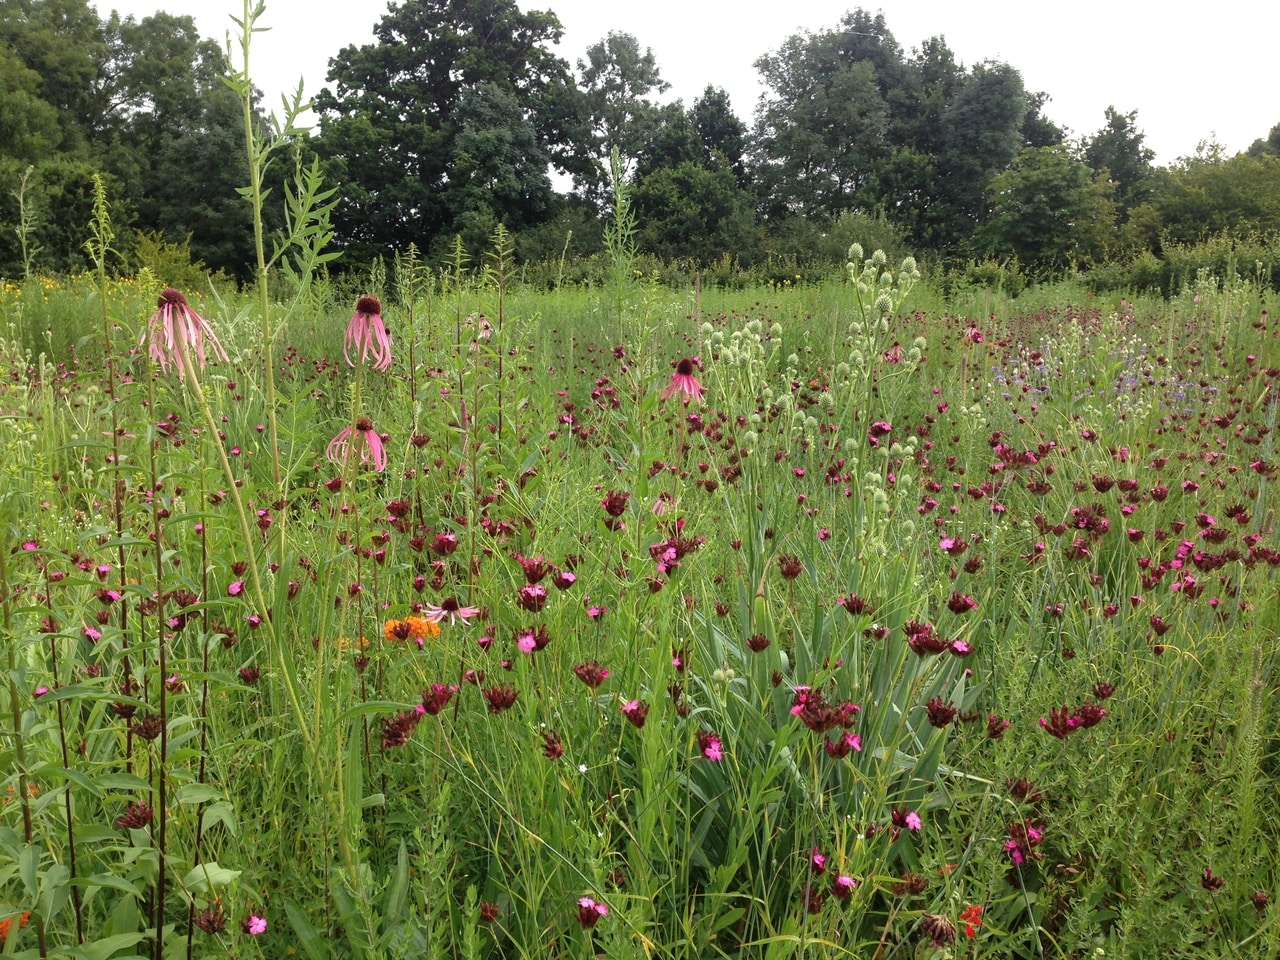 James Hitchmough's meadow at Tom Stuart Smith's private garden in July 2016 with Echinacea pallida, Dianthus carthusianorum and Eryngium yuccafolium predominantly in bloom